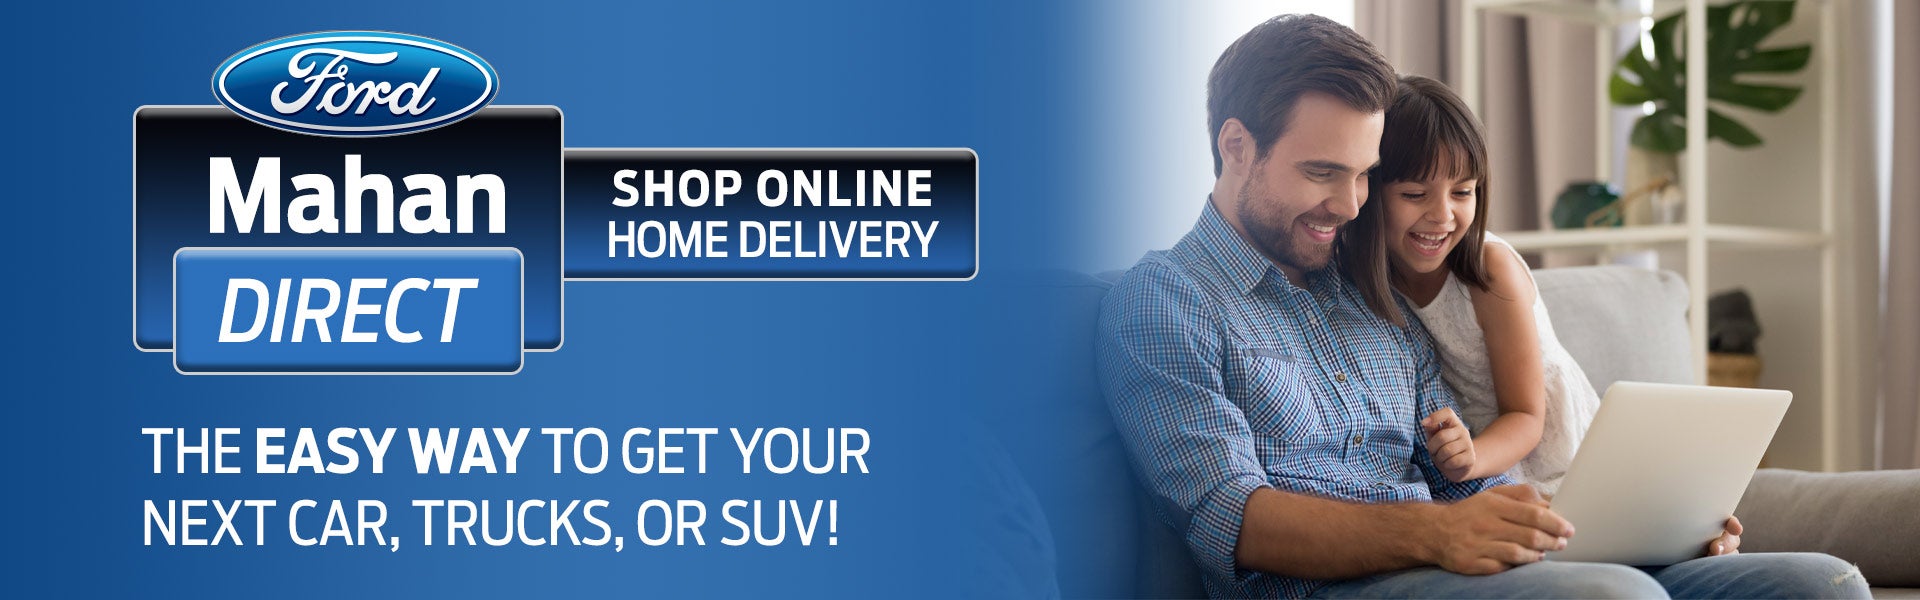 Shop Online Home Delivery